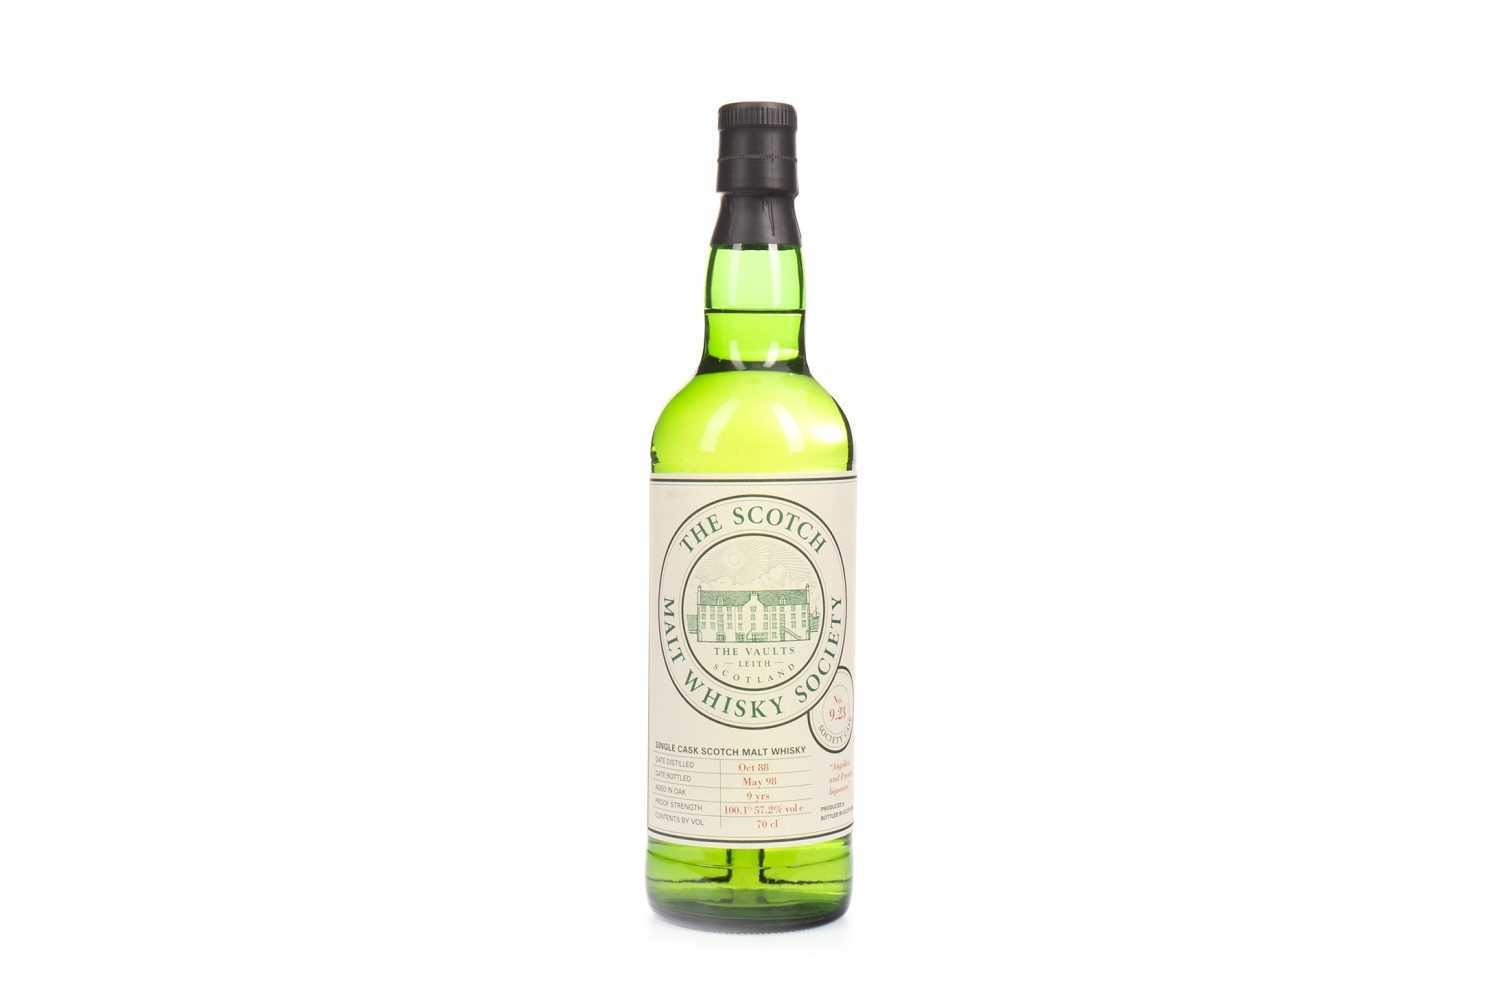 Lot 201 - GLEN GRANT 1988 SMWS 9.23 AGED 9 YEARS